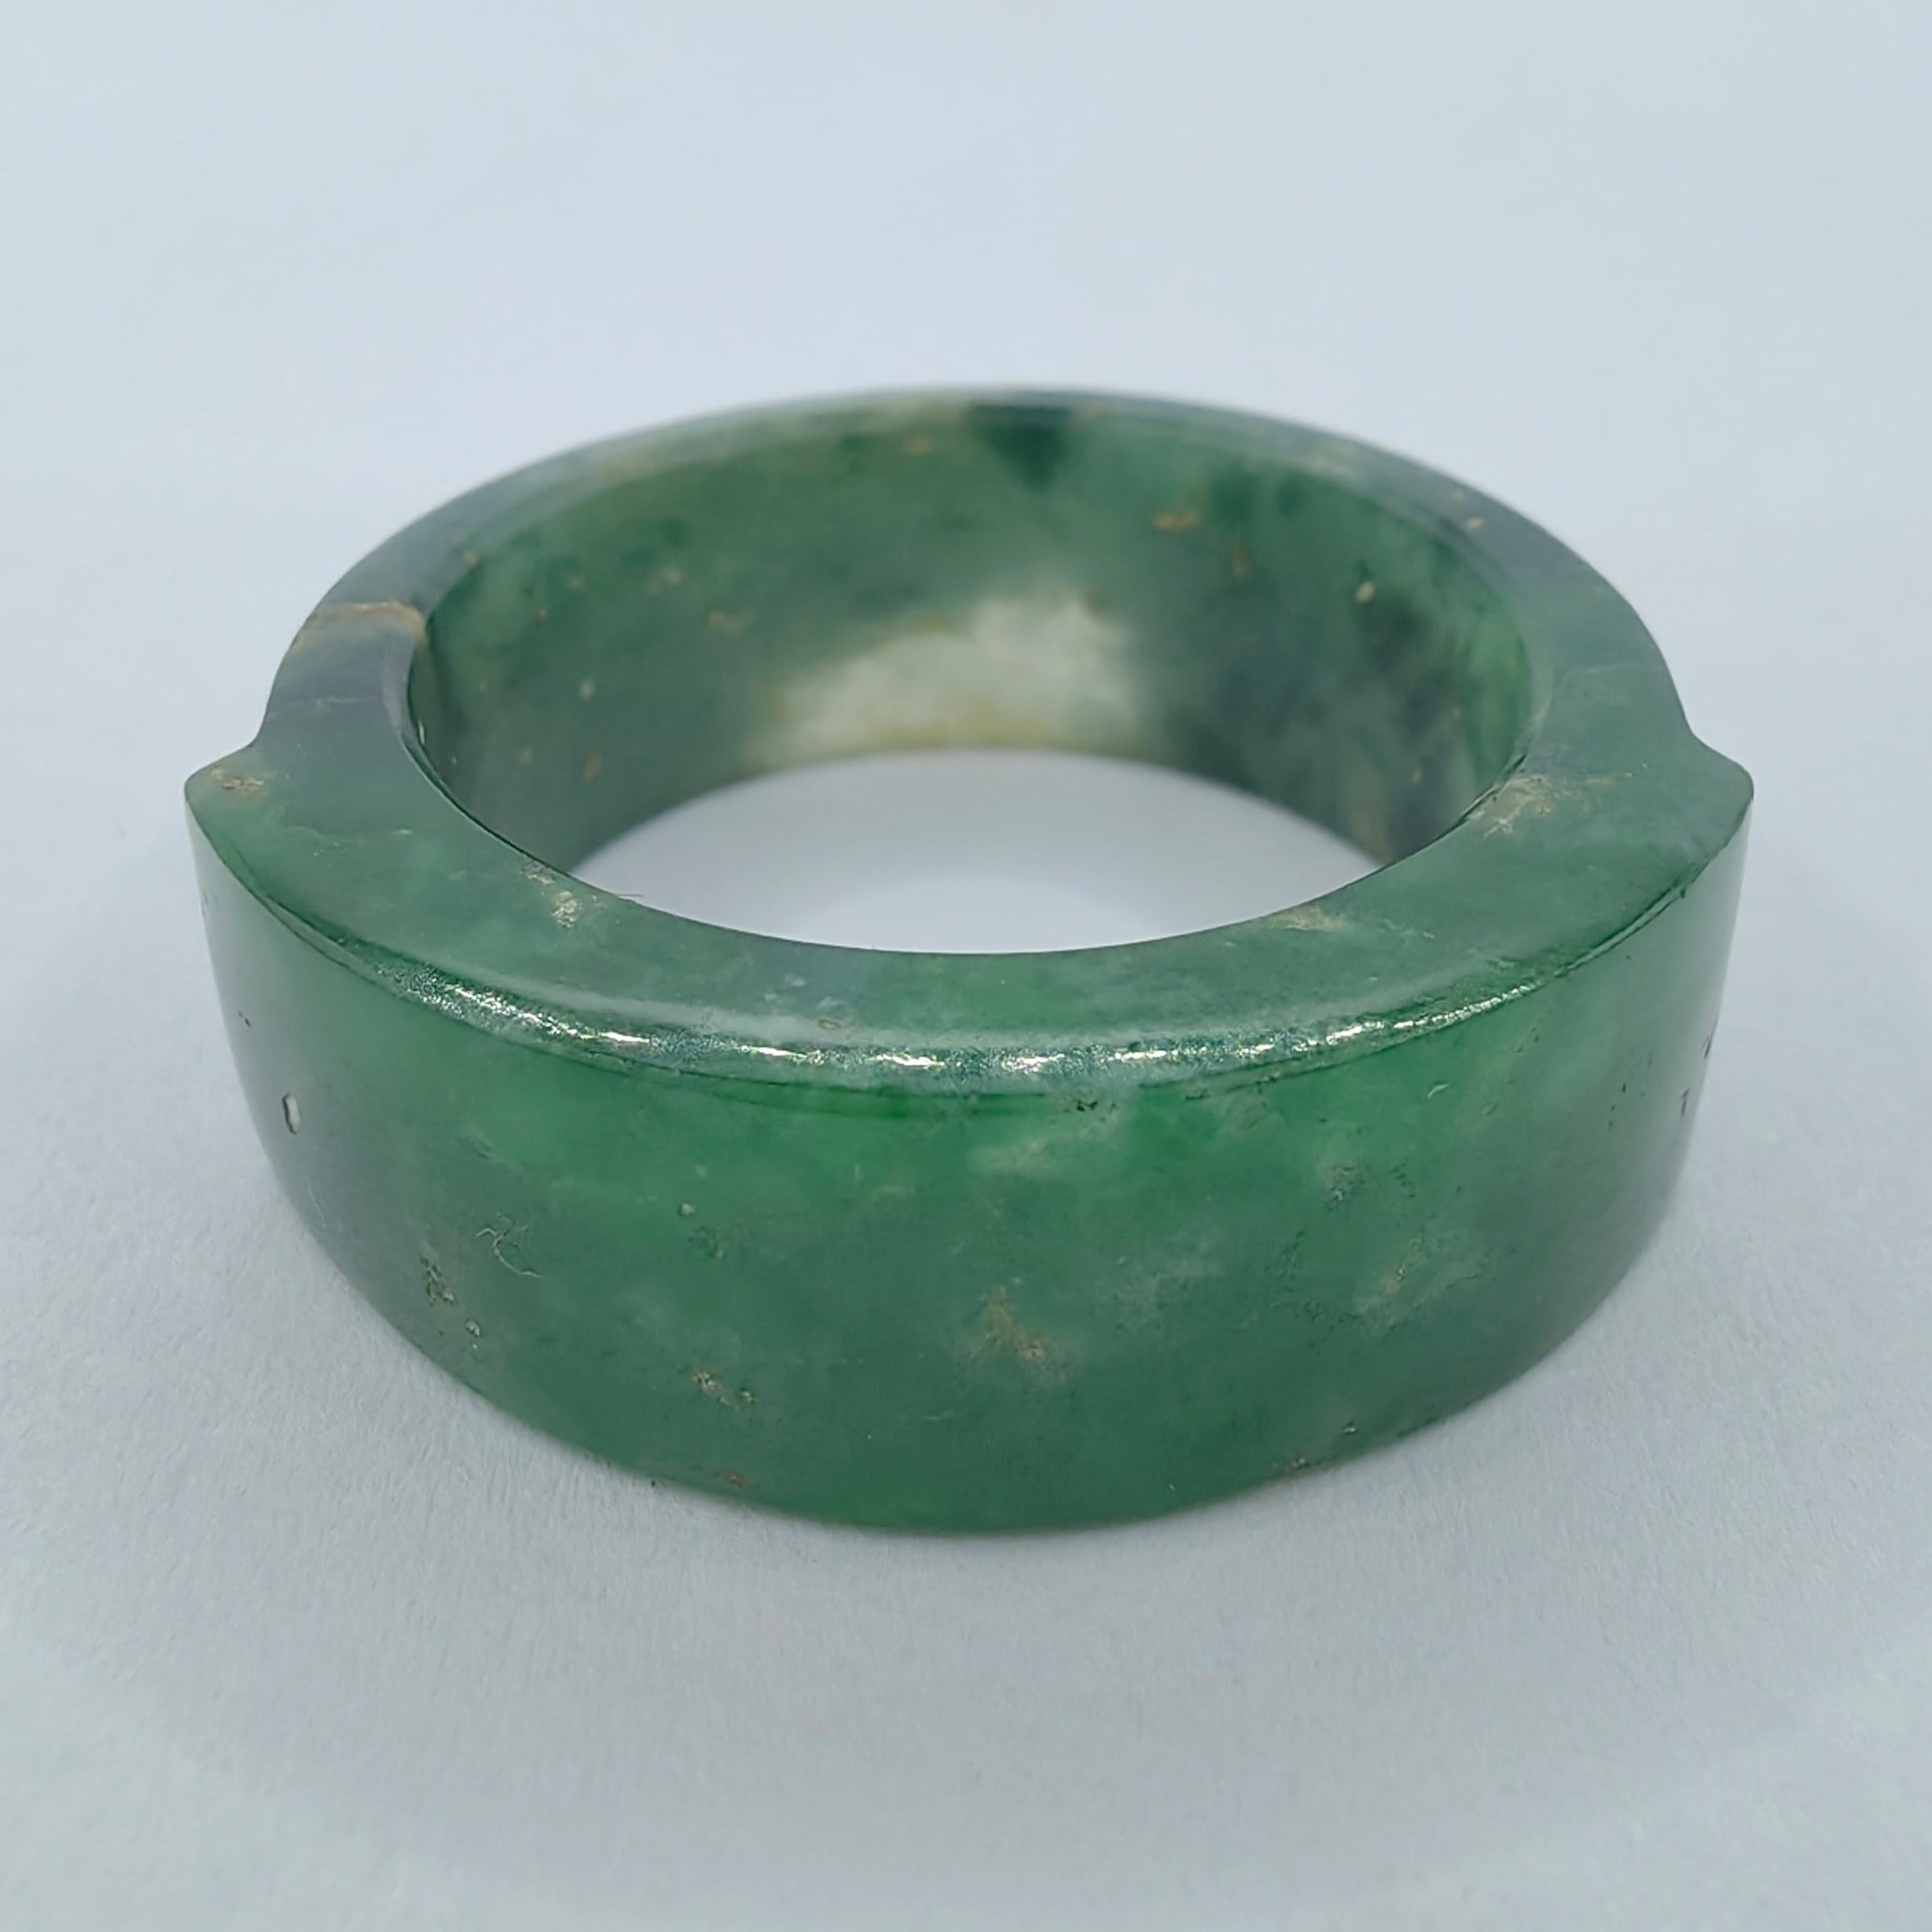 Introducing our Antique Genuine Burmese Imperial Green Jadeite Jade Statement Ring, crafted circa 1880 during the late Qing Dynasty. This remarkable piece not only showcases the timeless beauty of jadeite jade but also carries the historical